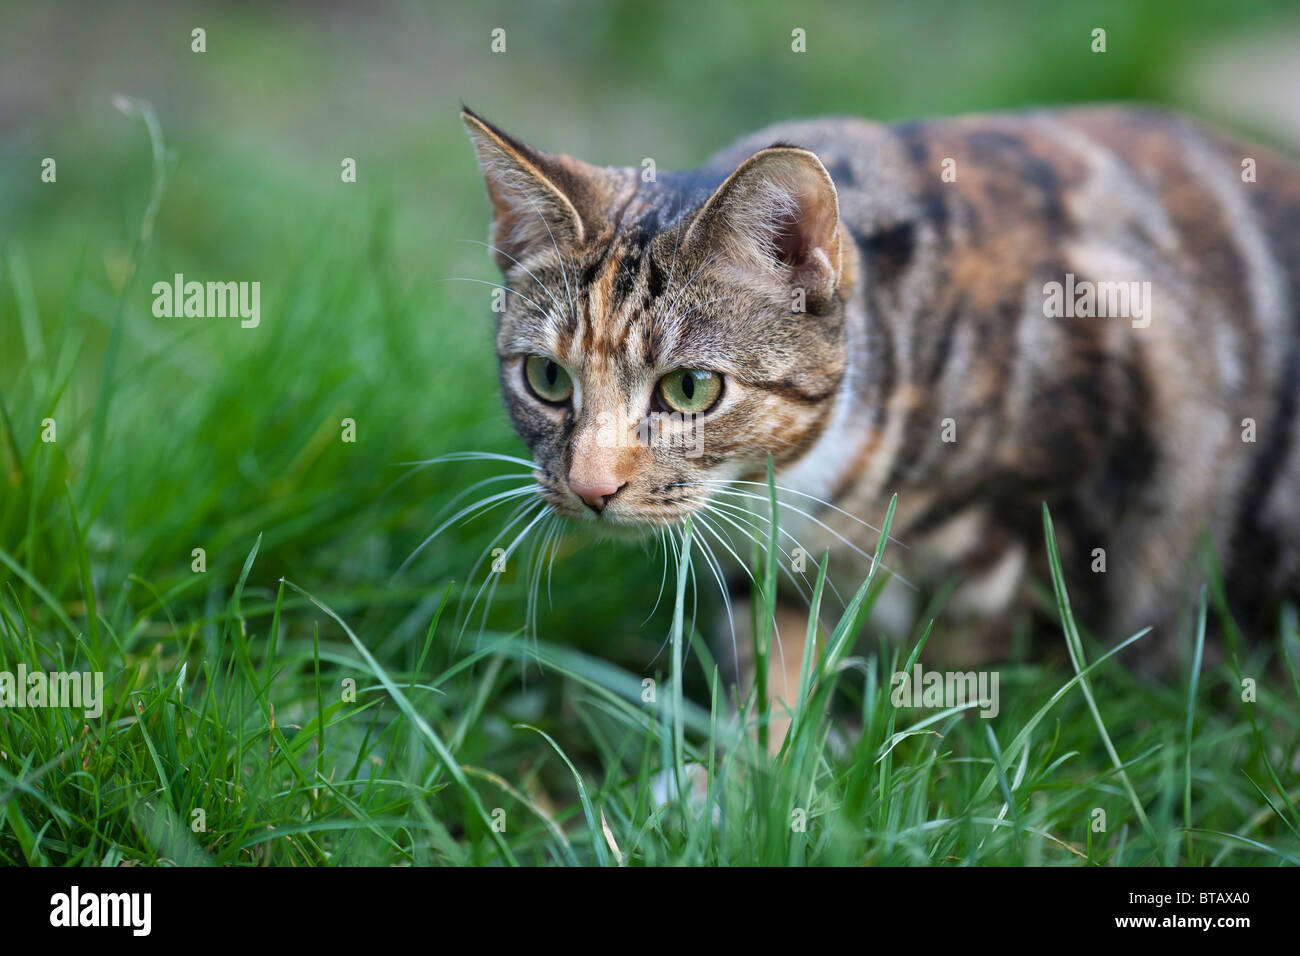 A female brown and black tabby cat prowling in the grass Stock Photo